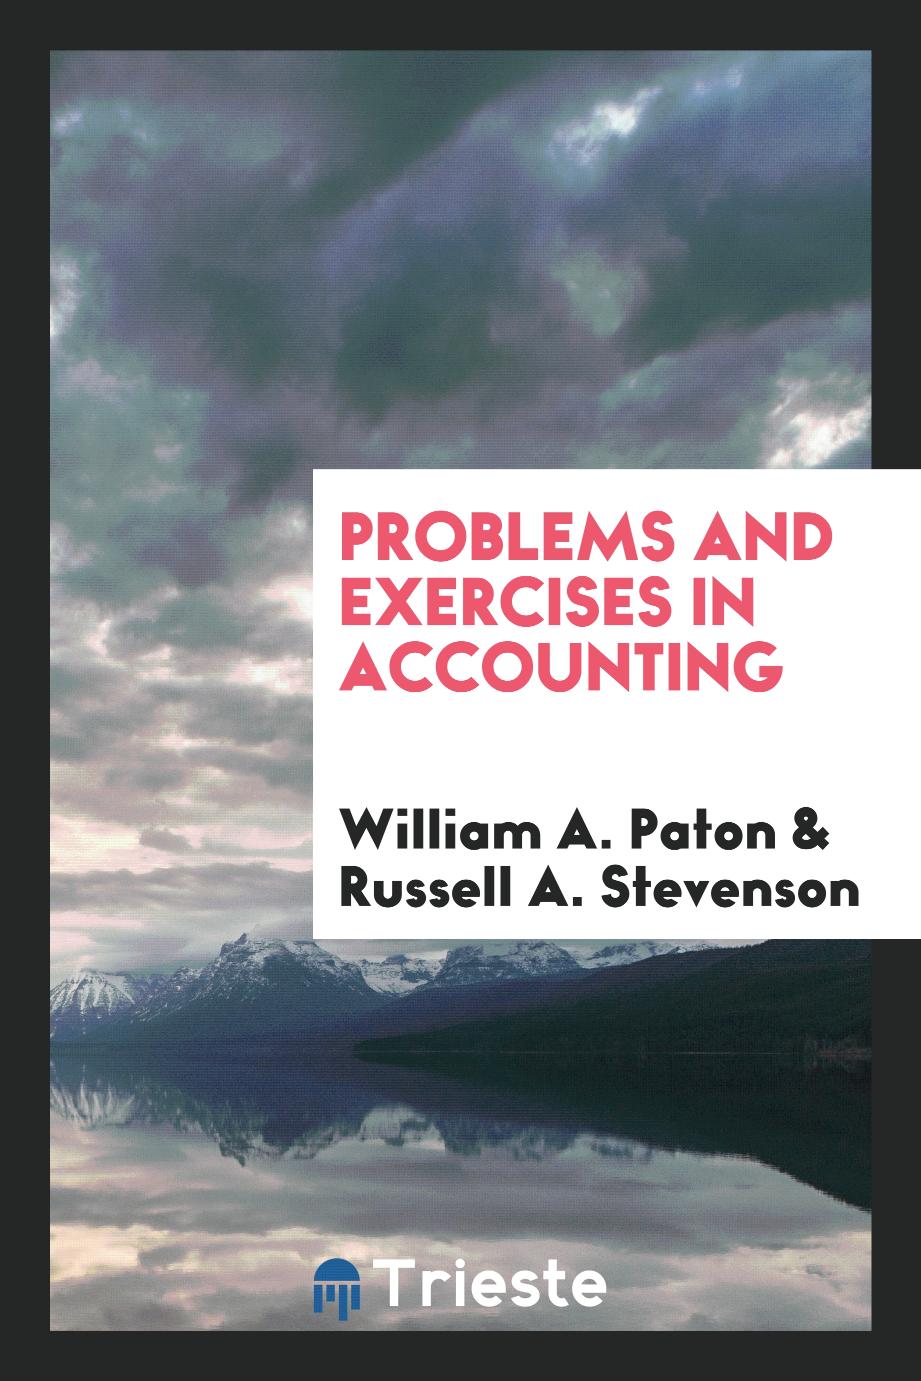 William A. Paton, Russell A. Stevenson - Problems and exercises in accounting